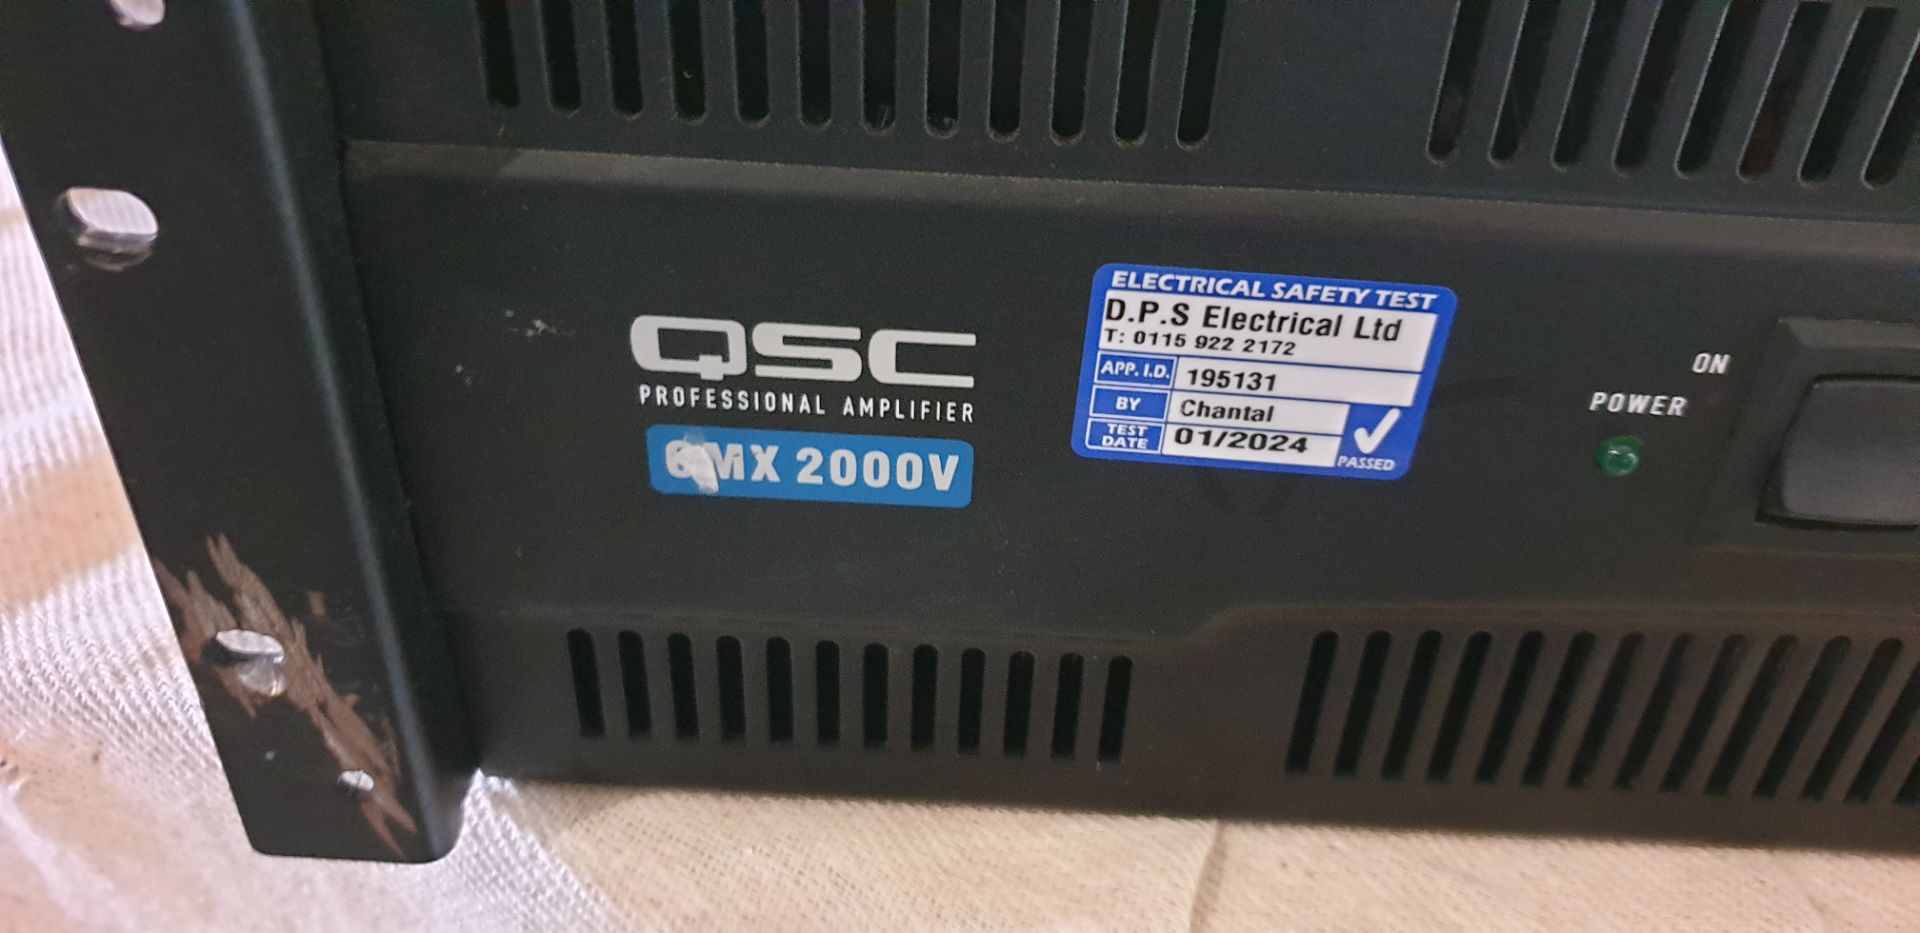 1 ; QSC CMX-2000V Professional Power Amplifier - Image 2 of 3